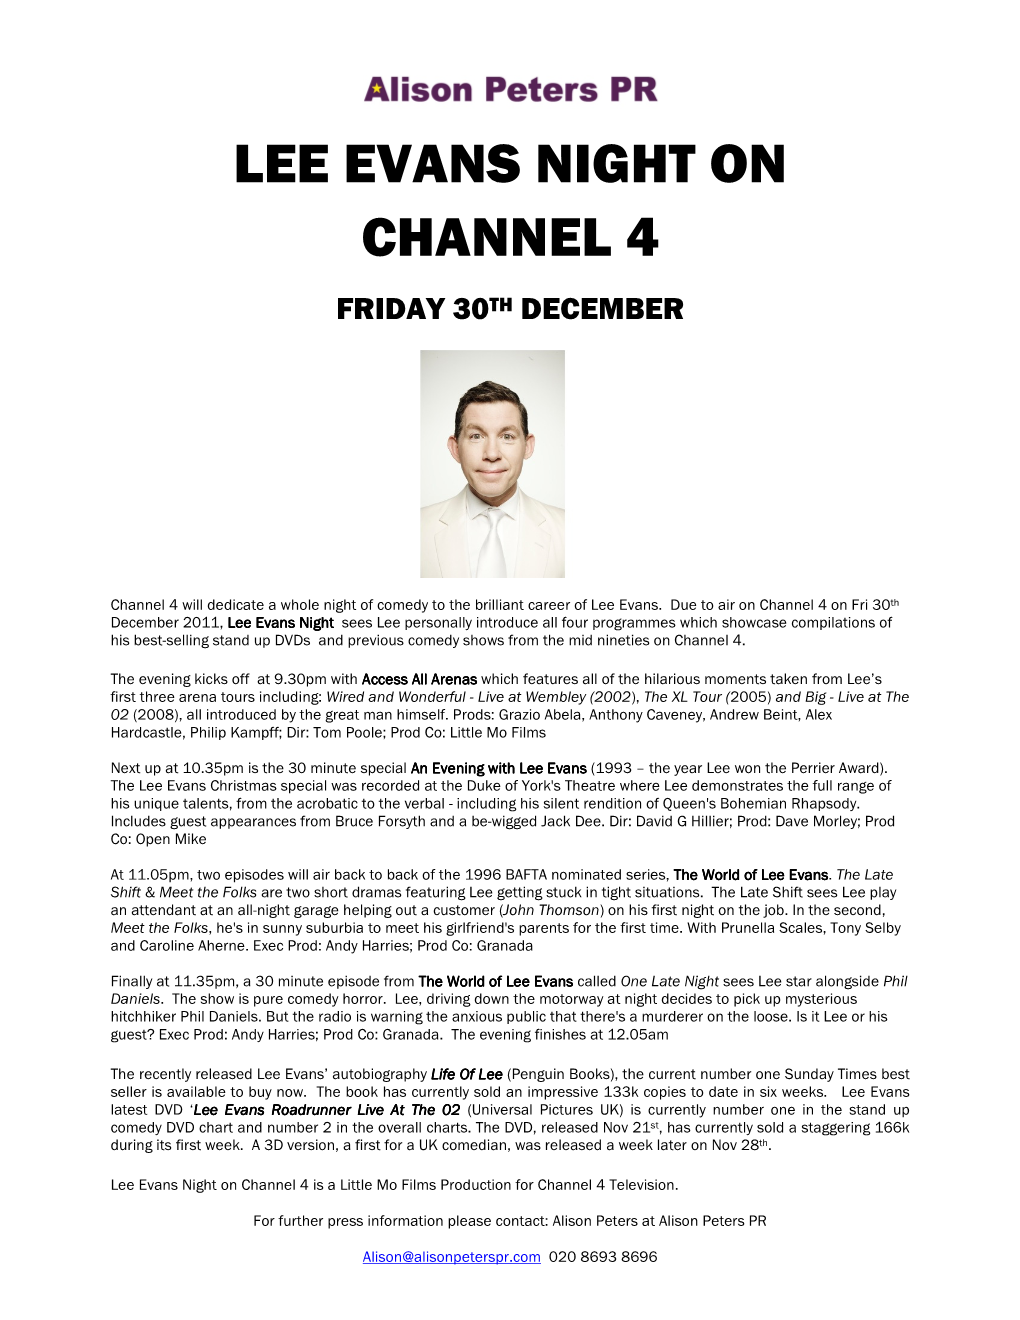 Lee Evans Night on Channel 4